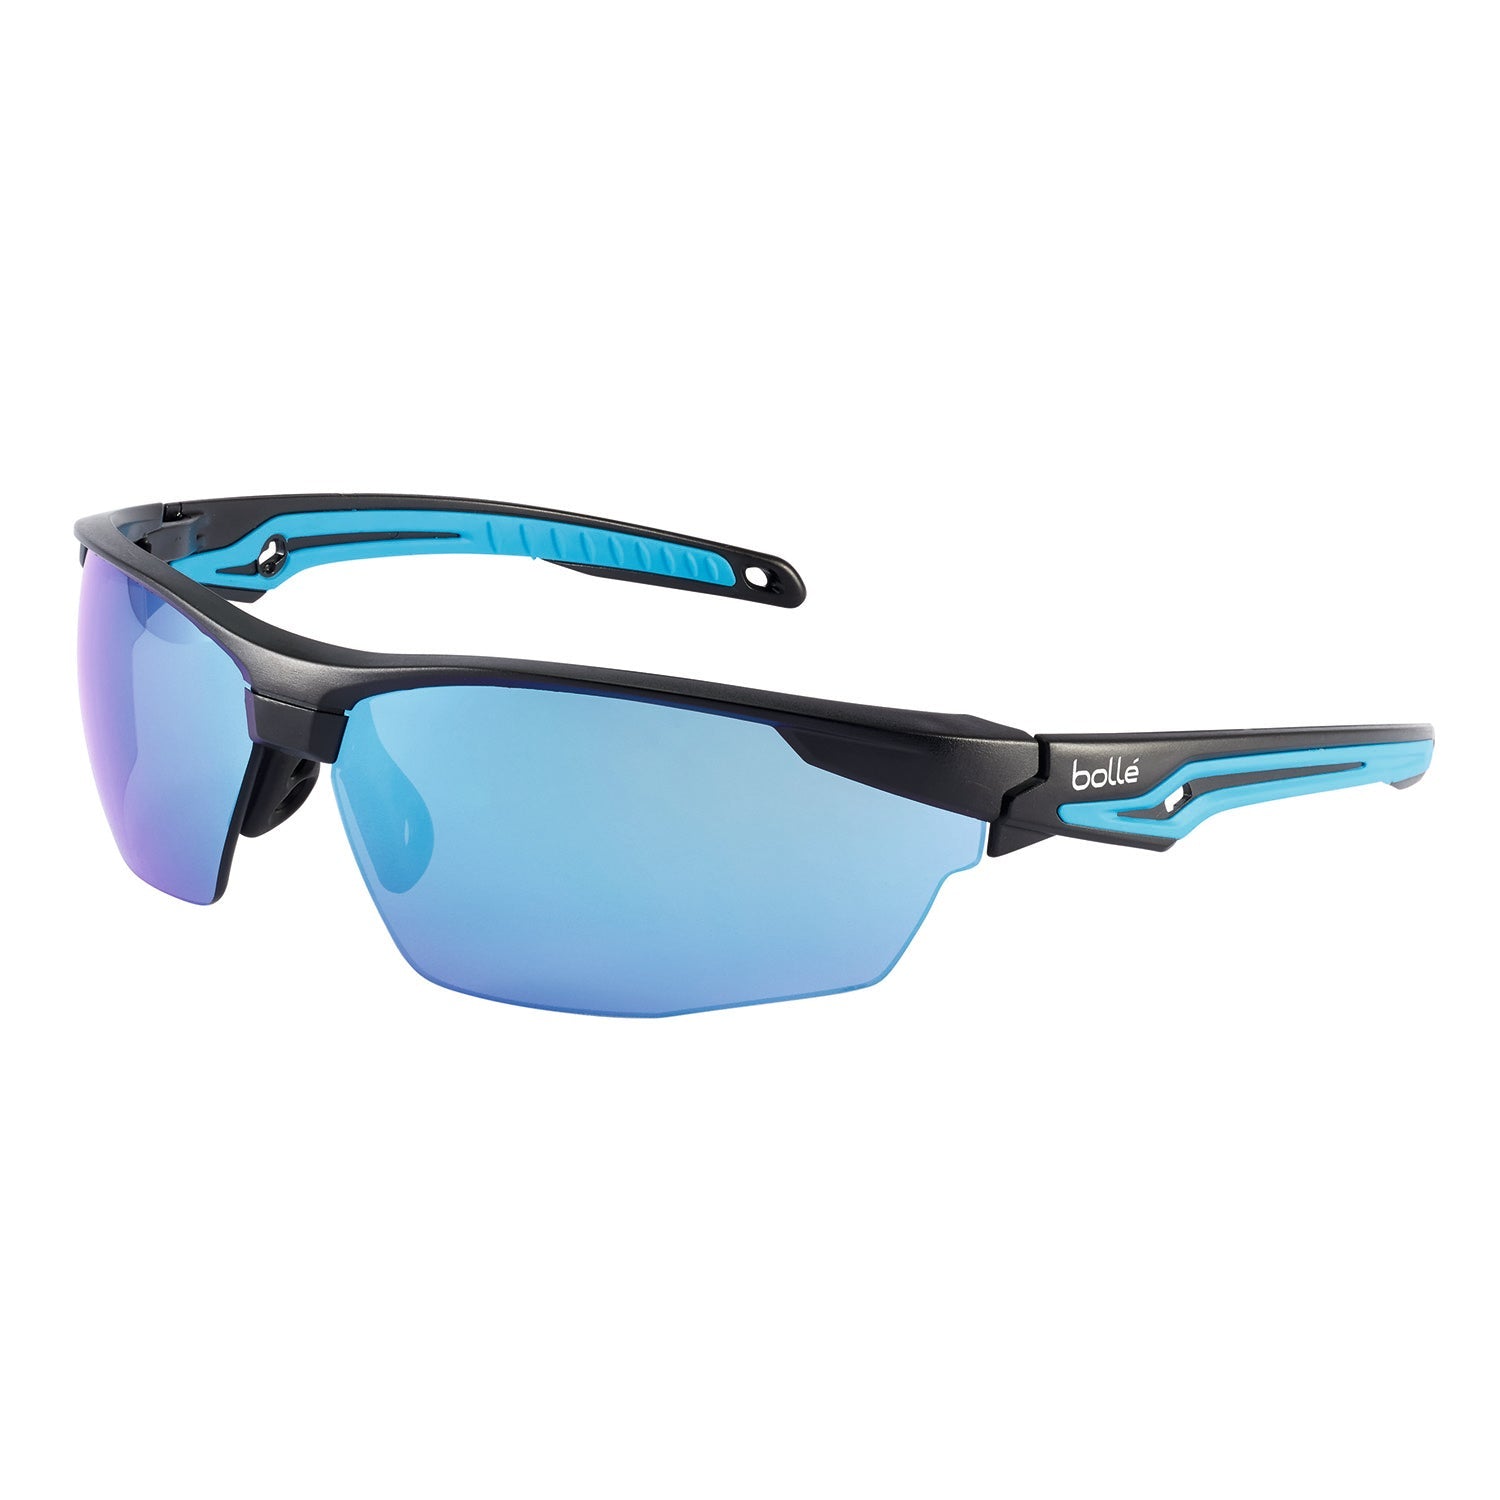 Bolle TRYON TRYOFLASH Safety Glasses, Blue Flash Lens